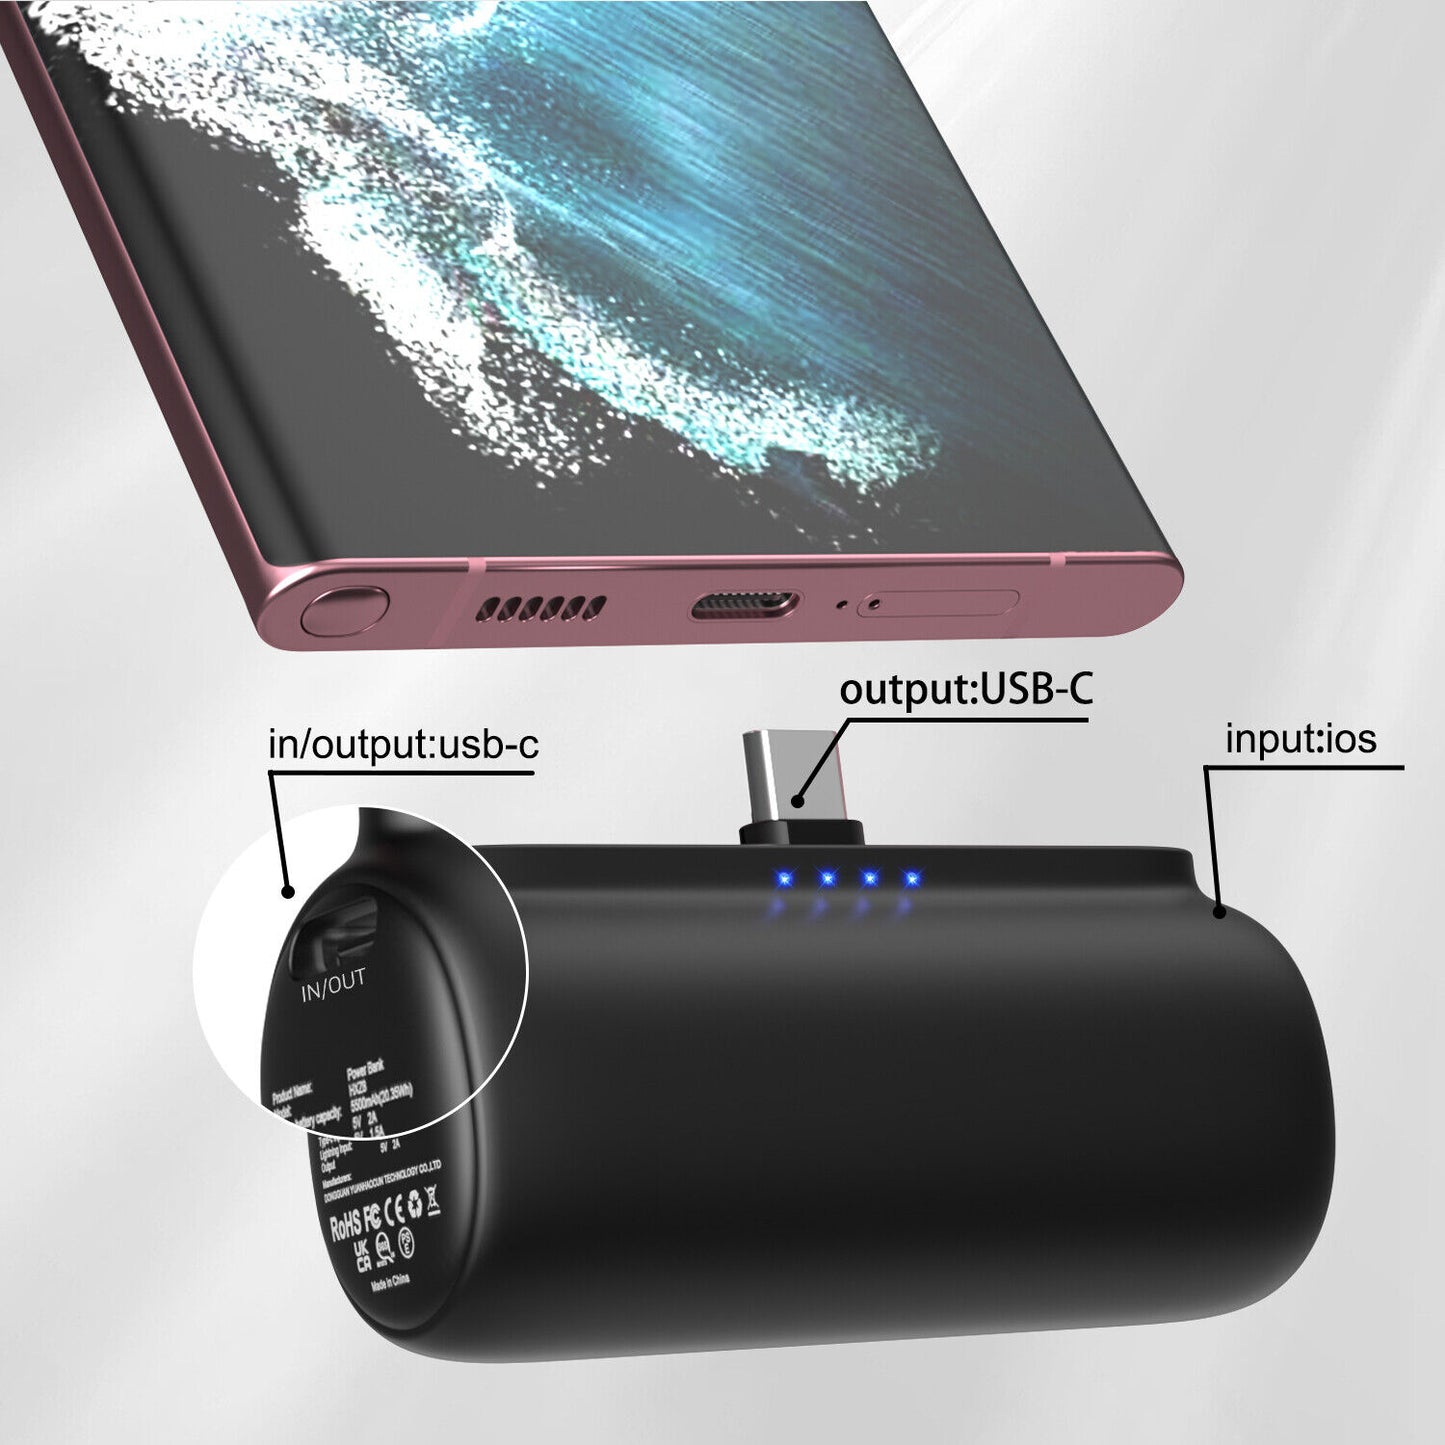 SwiftCharge: Mini Portable Power Bank for iPhone and Type-C Devices